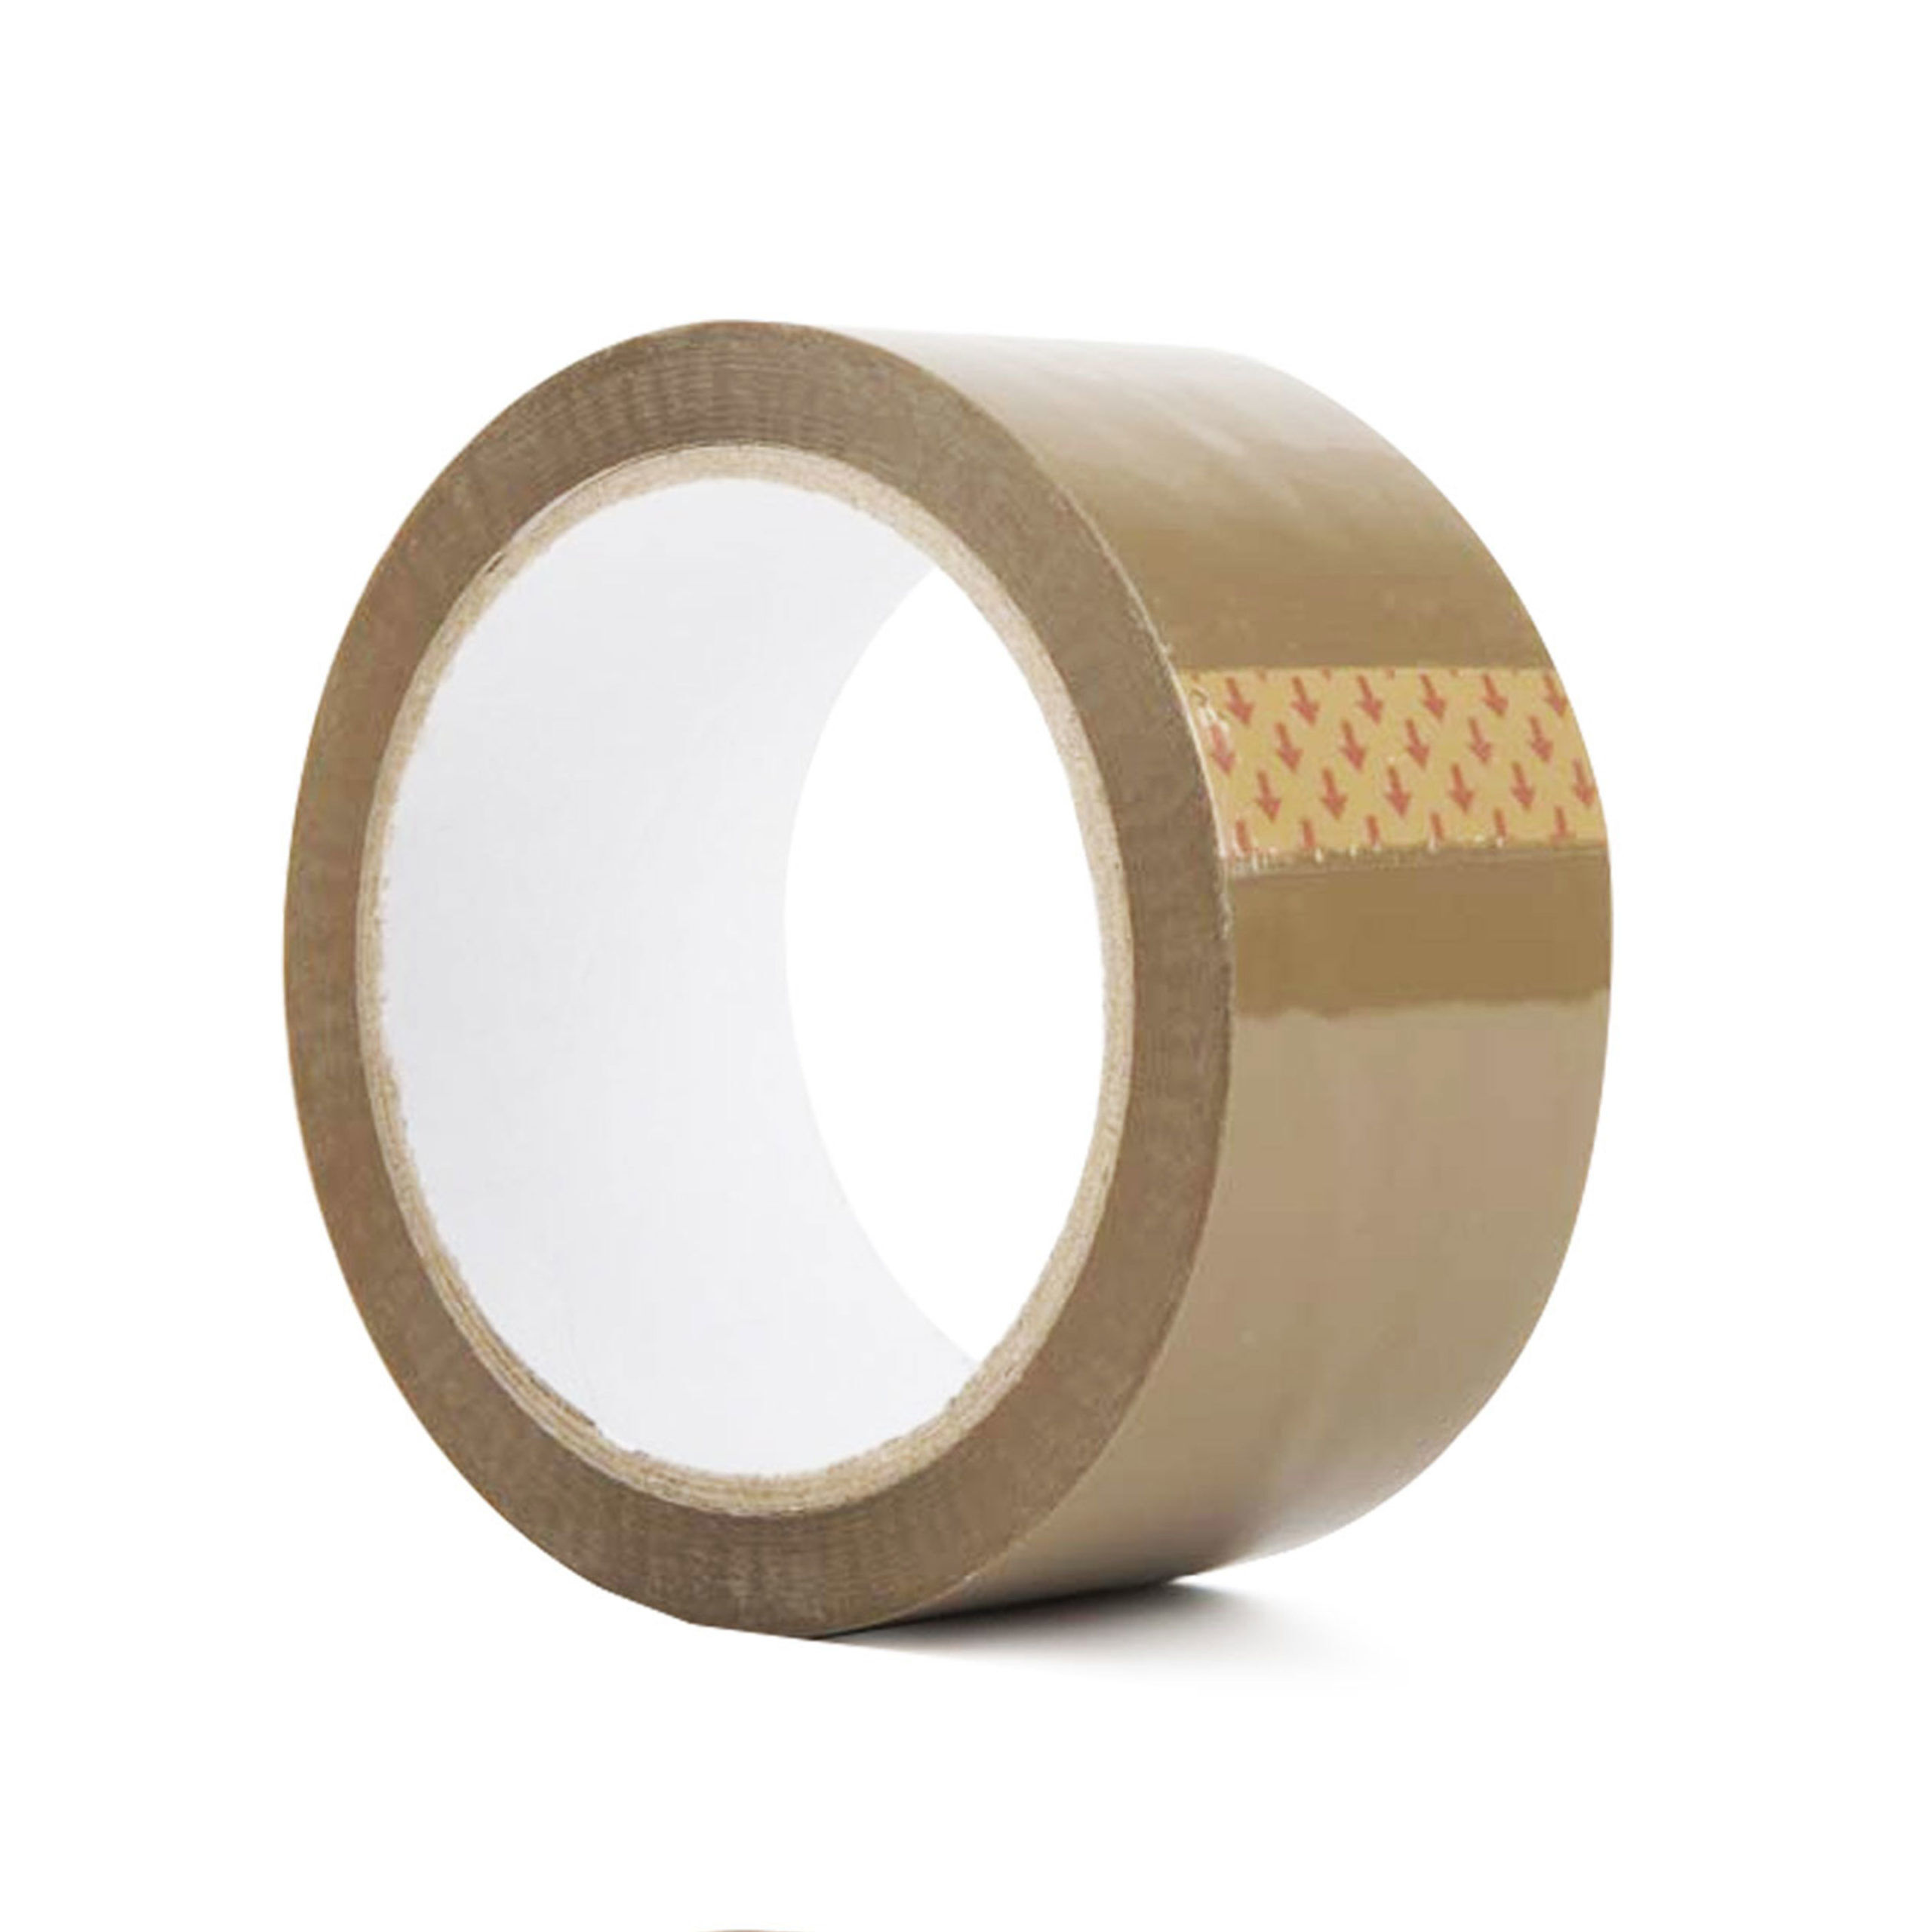 72 Rolls Brown Buff Tape EXTRA STRONG Parcel Carton Packing Packaging 48mm x 66m 